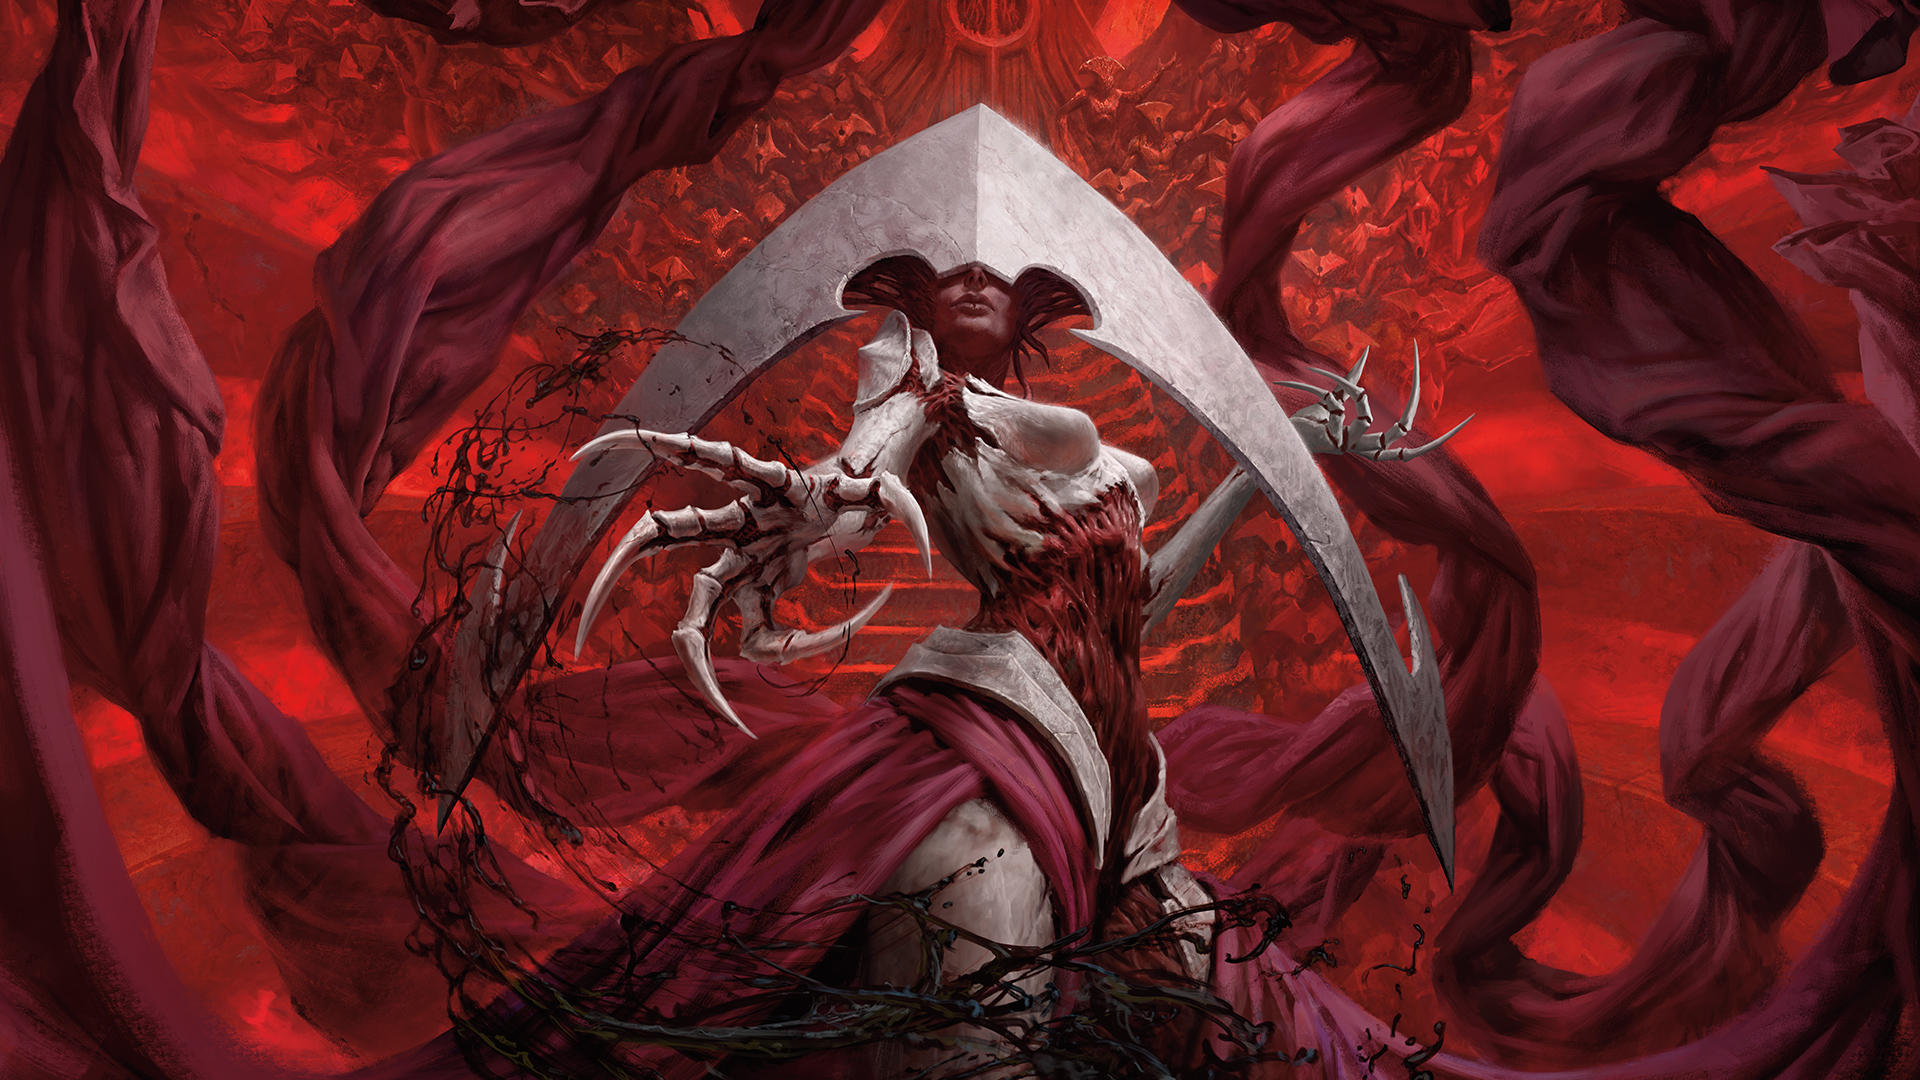 The next Magic set’s biomechanical nightmare was inspired by classical depictions of Hell